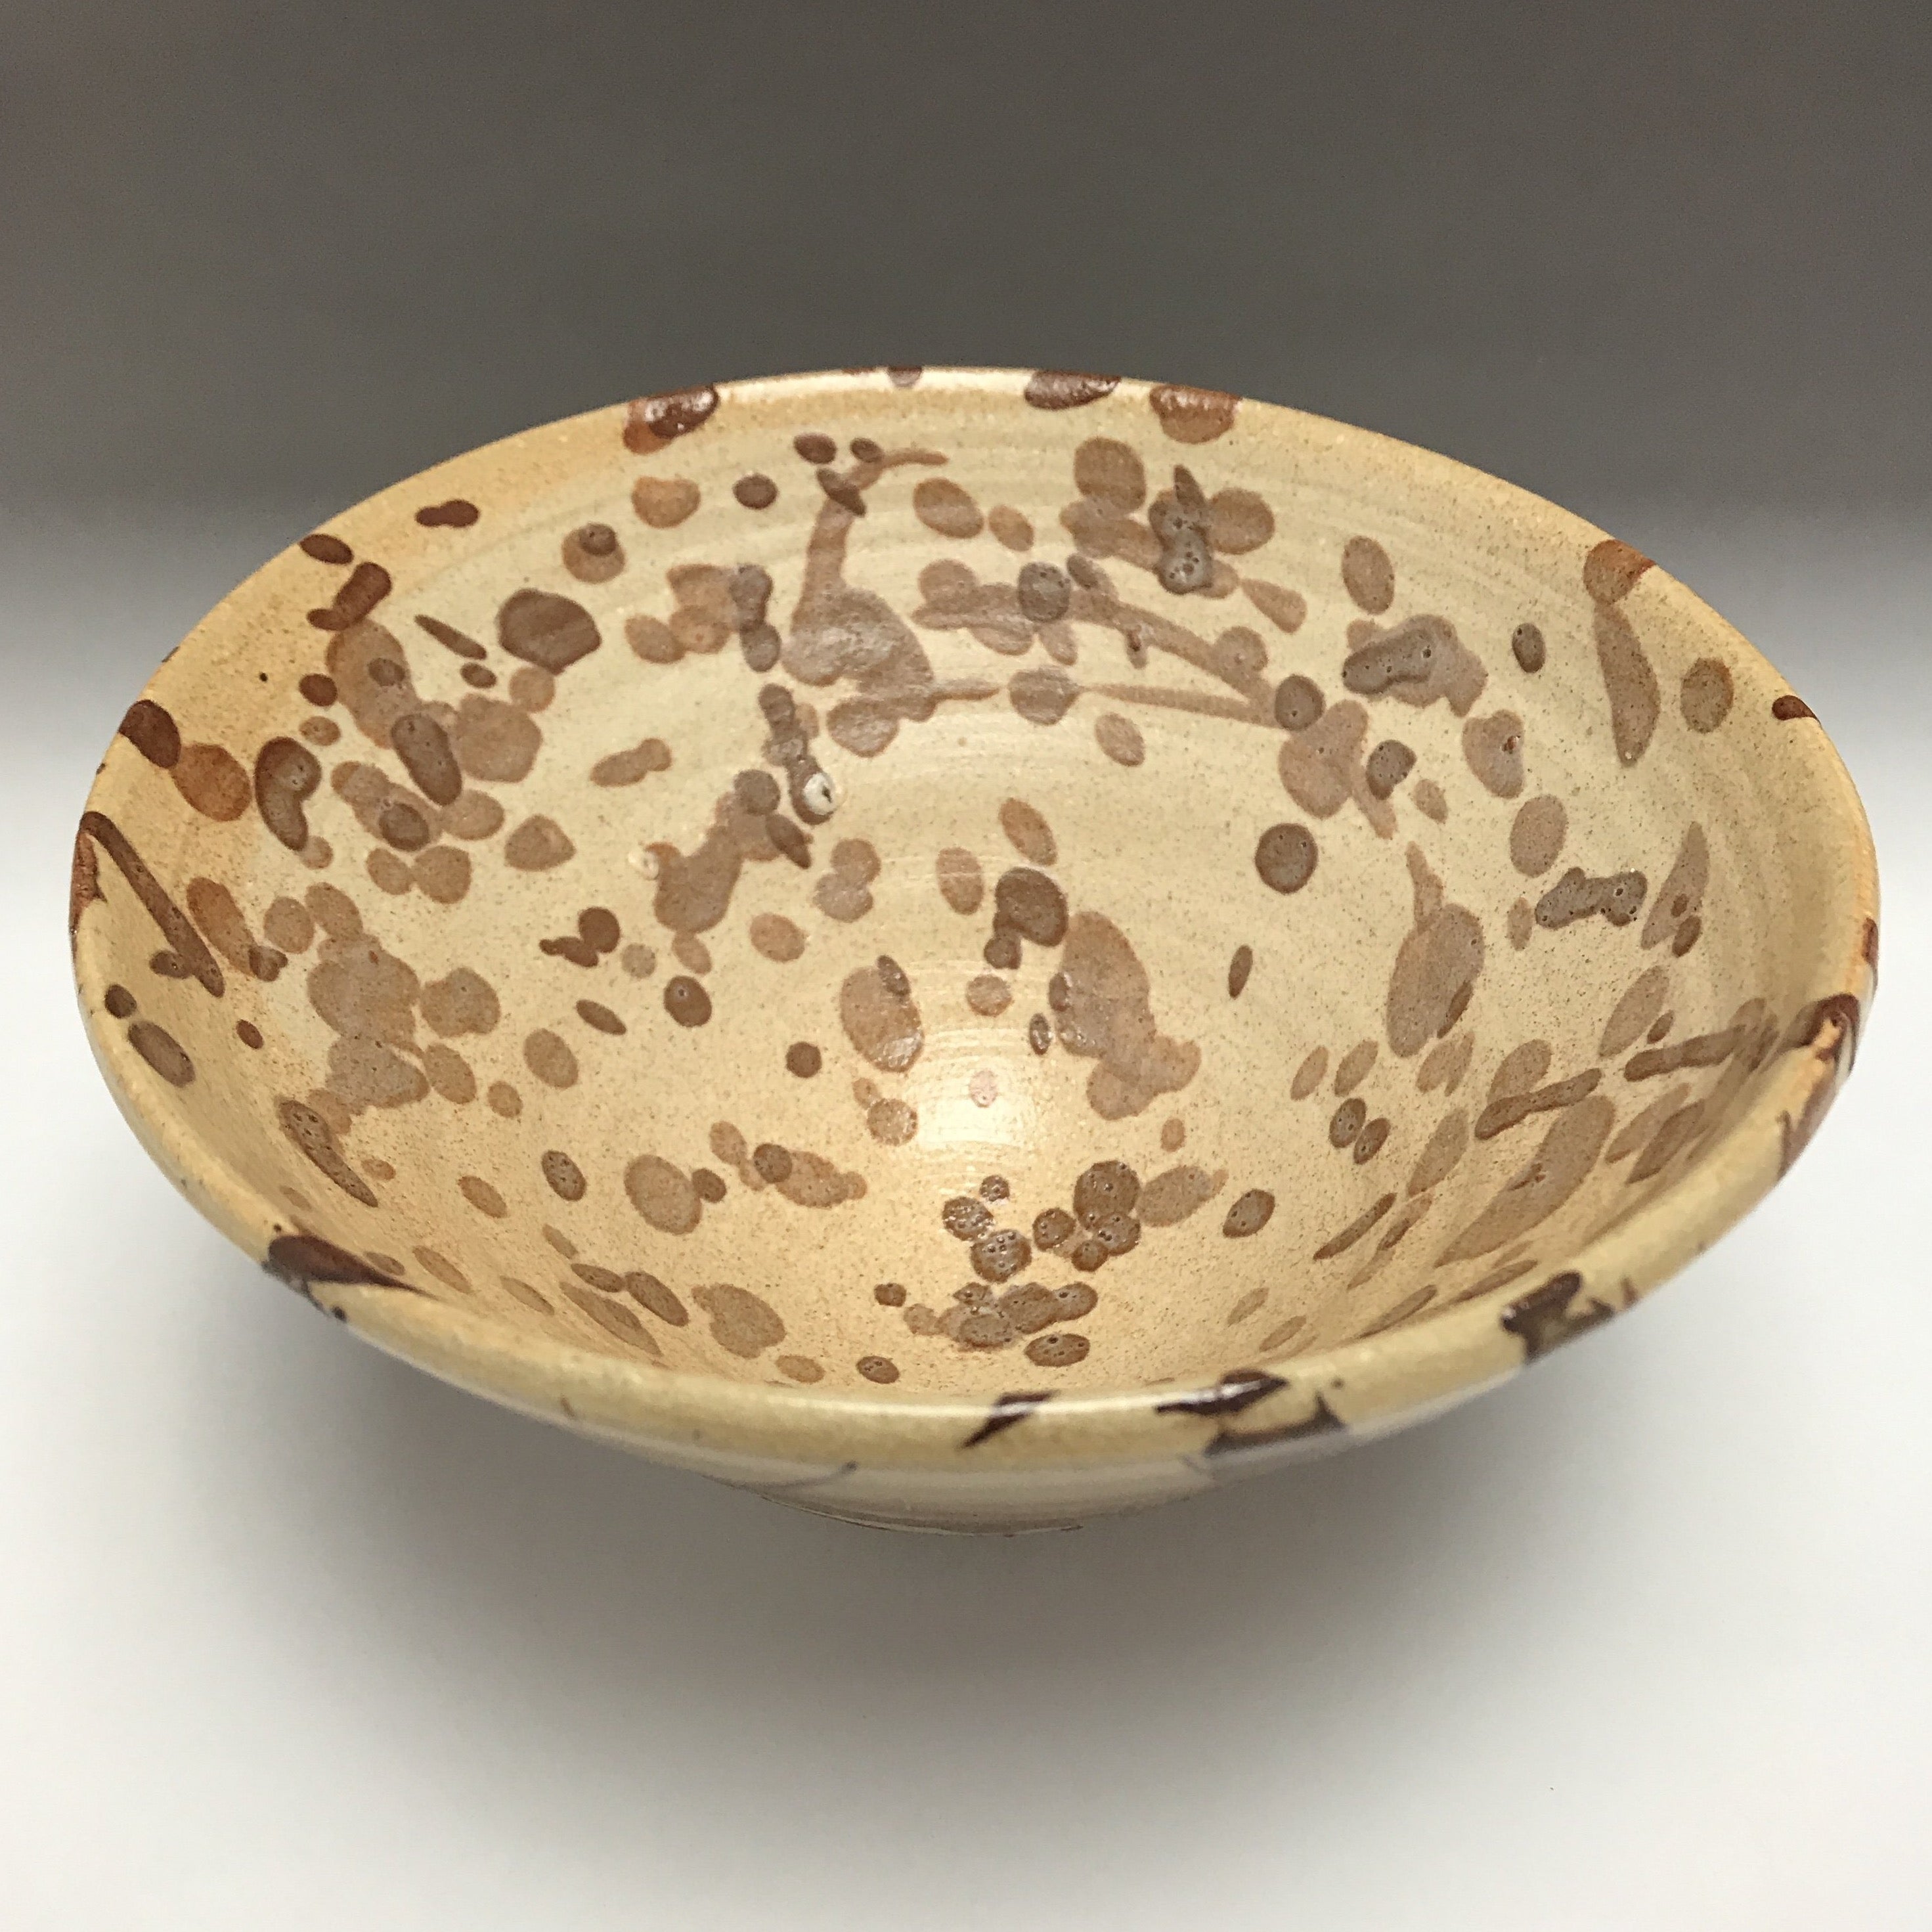 ceramic pottery bowl pale brown with dark brown splatters and splashes